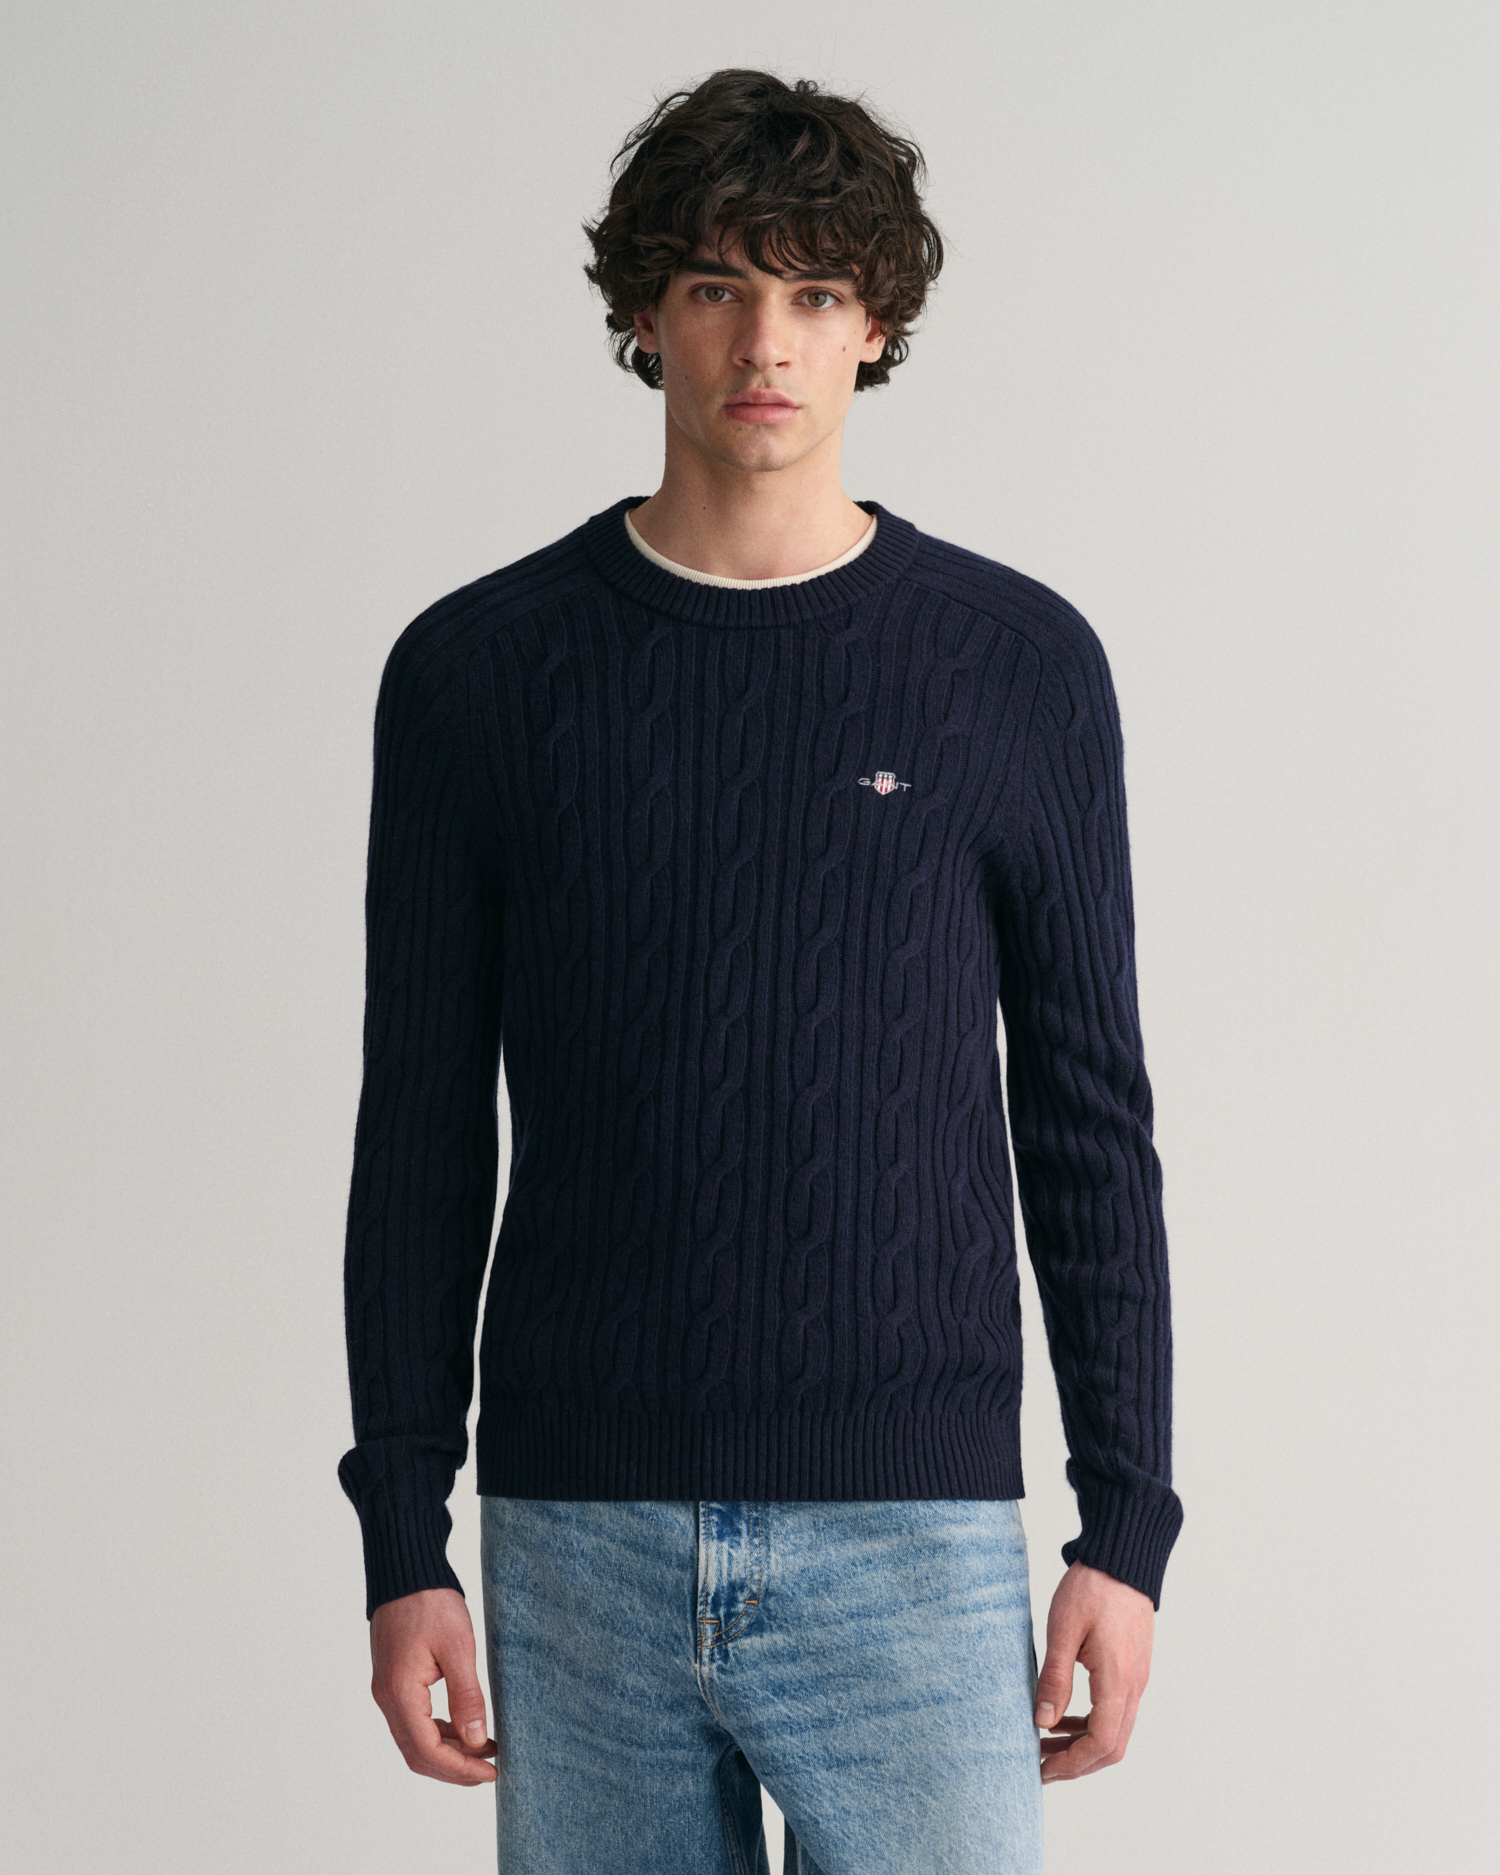 Lambswool Cable Knit Crew Neck Sweater - GANT